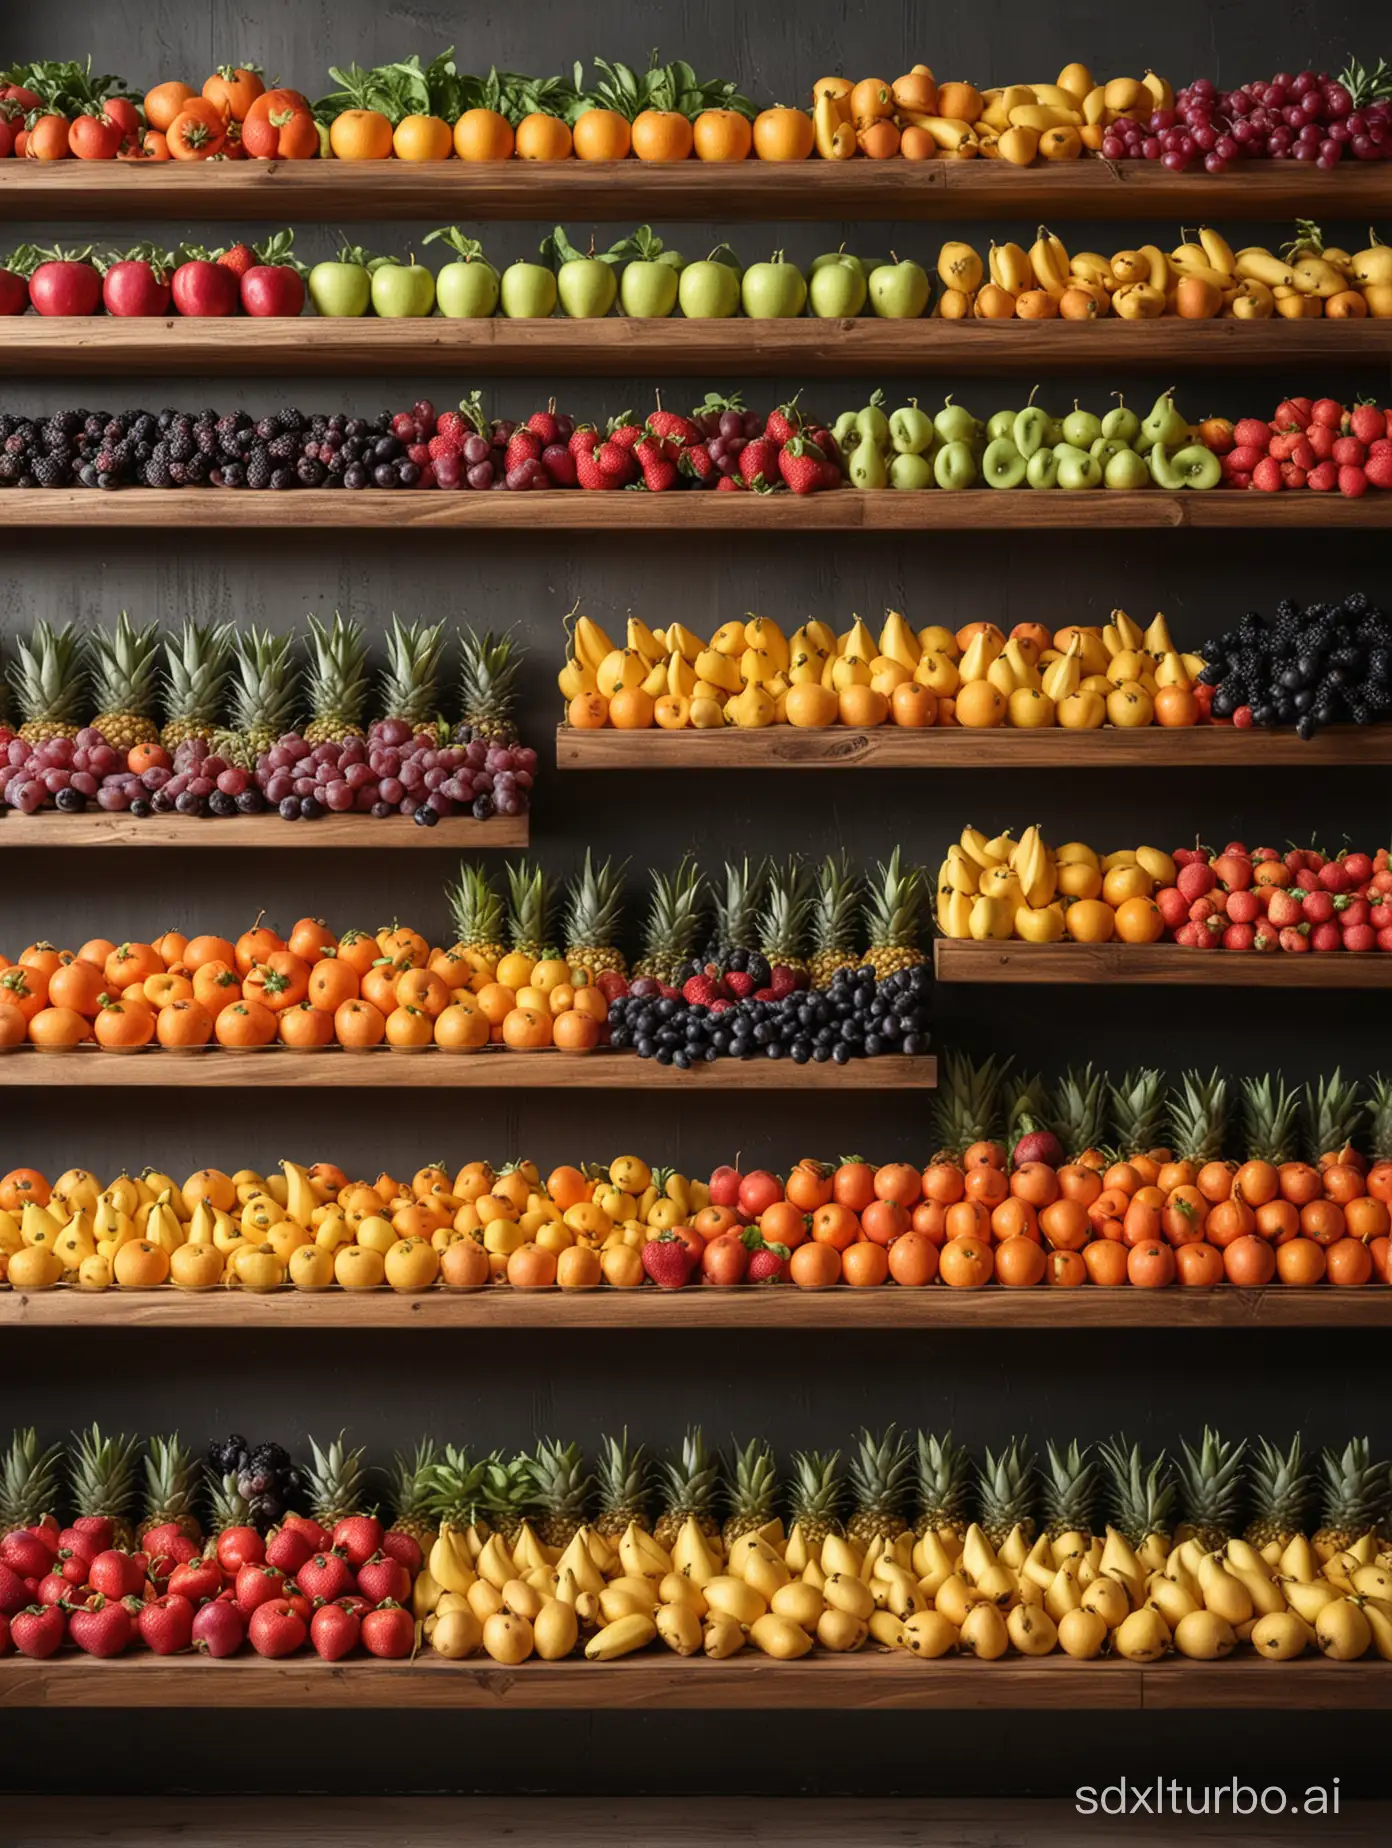 Vibrant-Fruit-Market-Display-Realistic-Photography-Composition